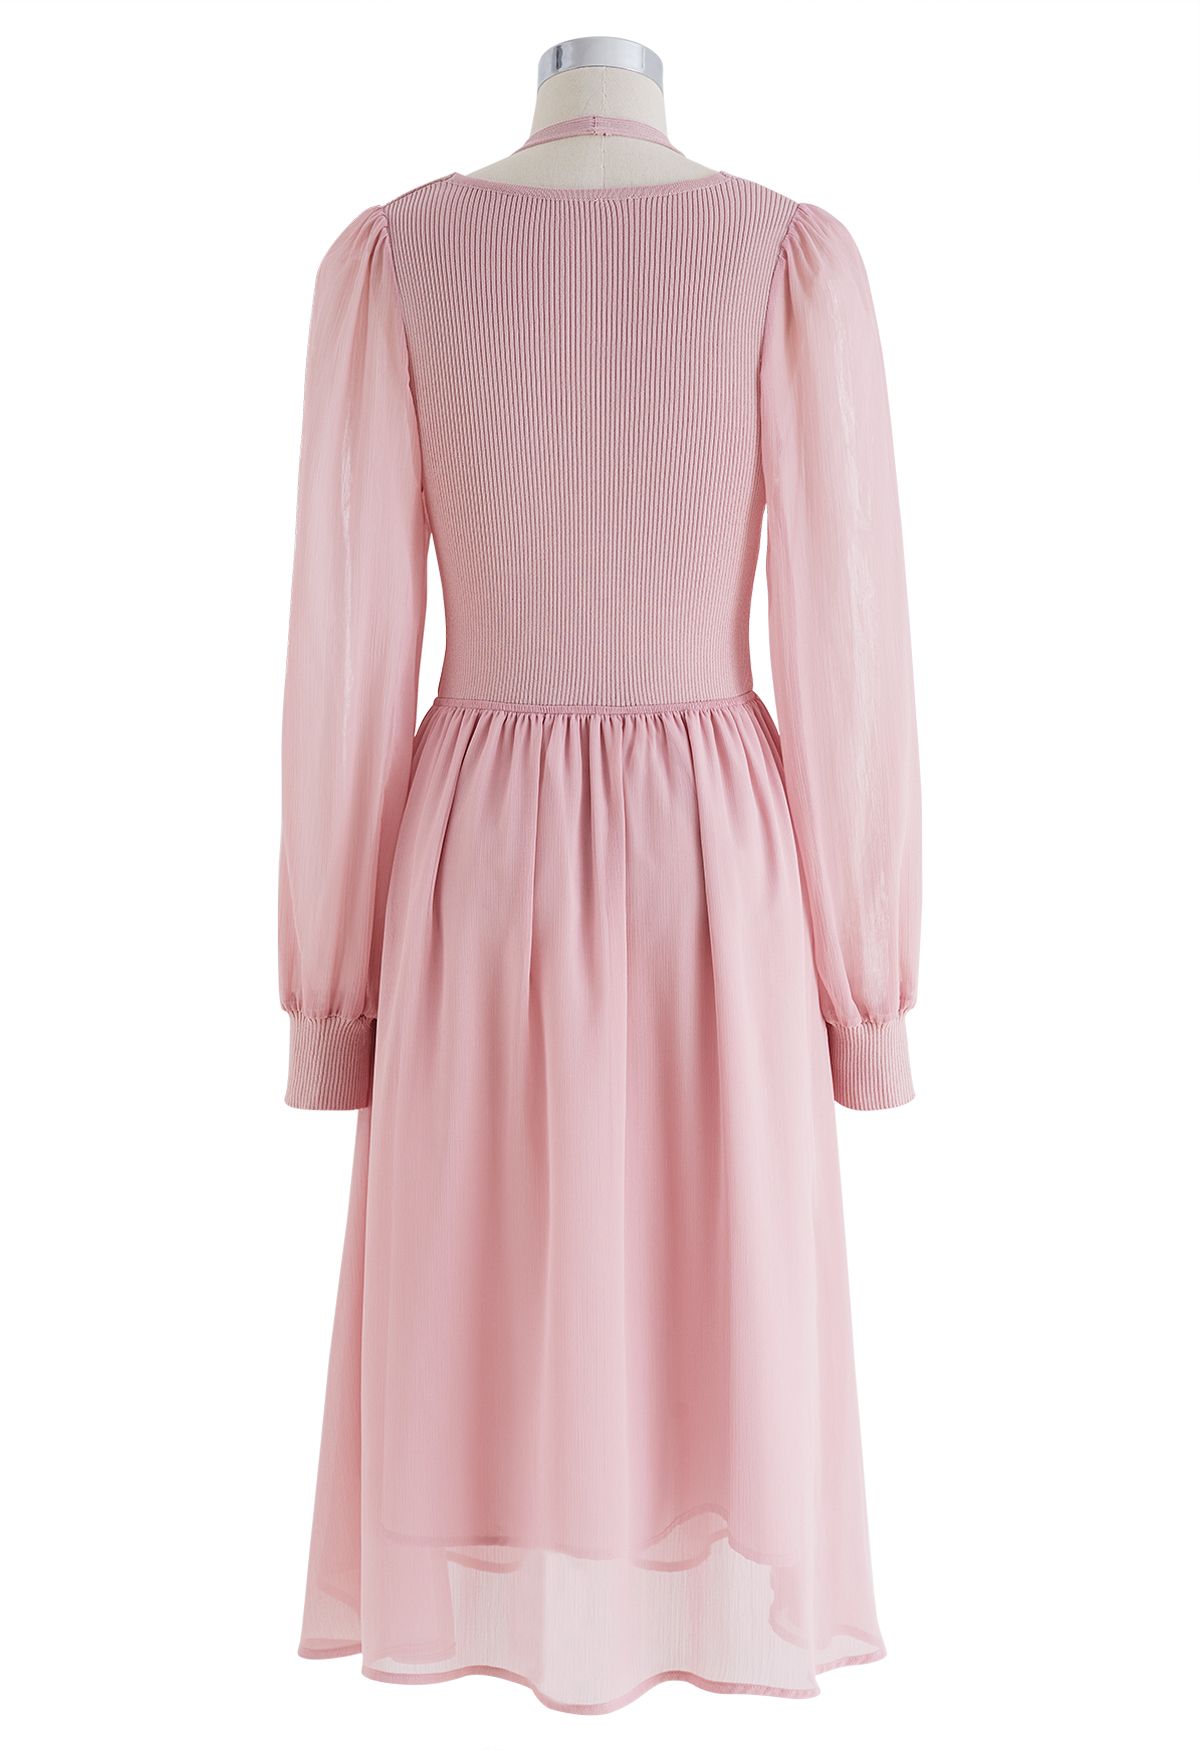 Knit Spliced Halter Neck Sheer Midi Dress in Pink - Retro, Indie and ...